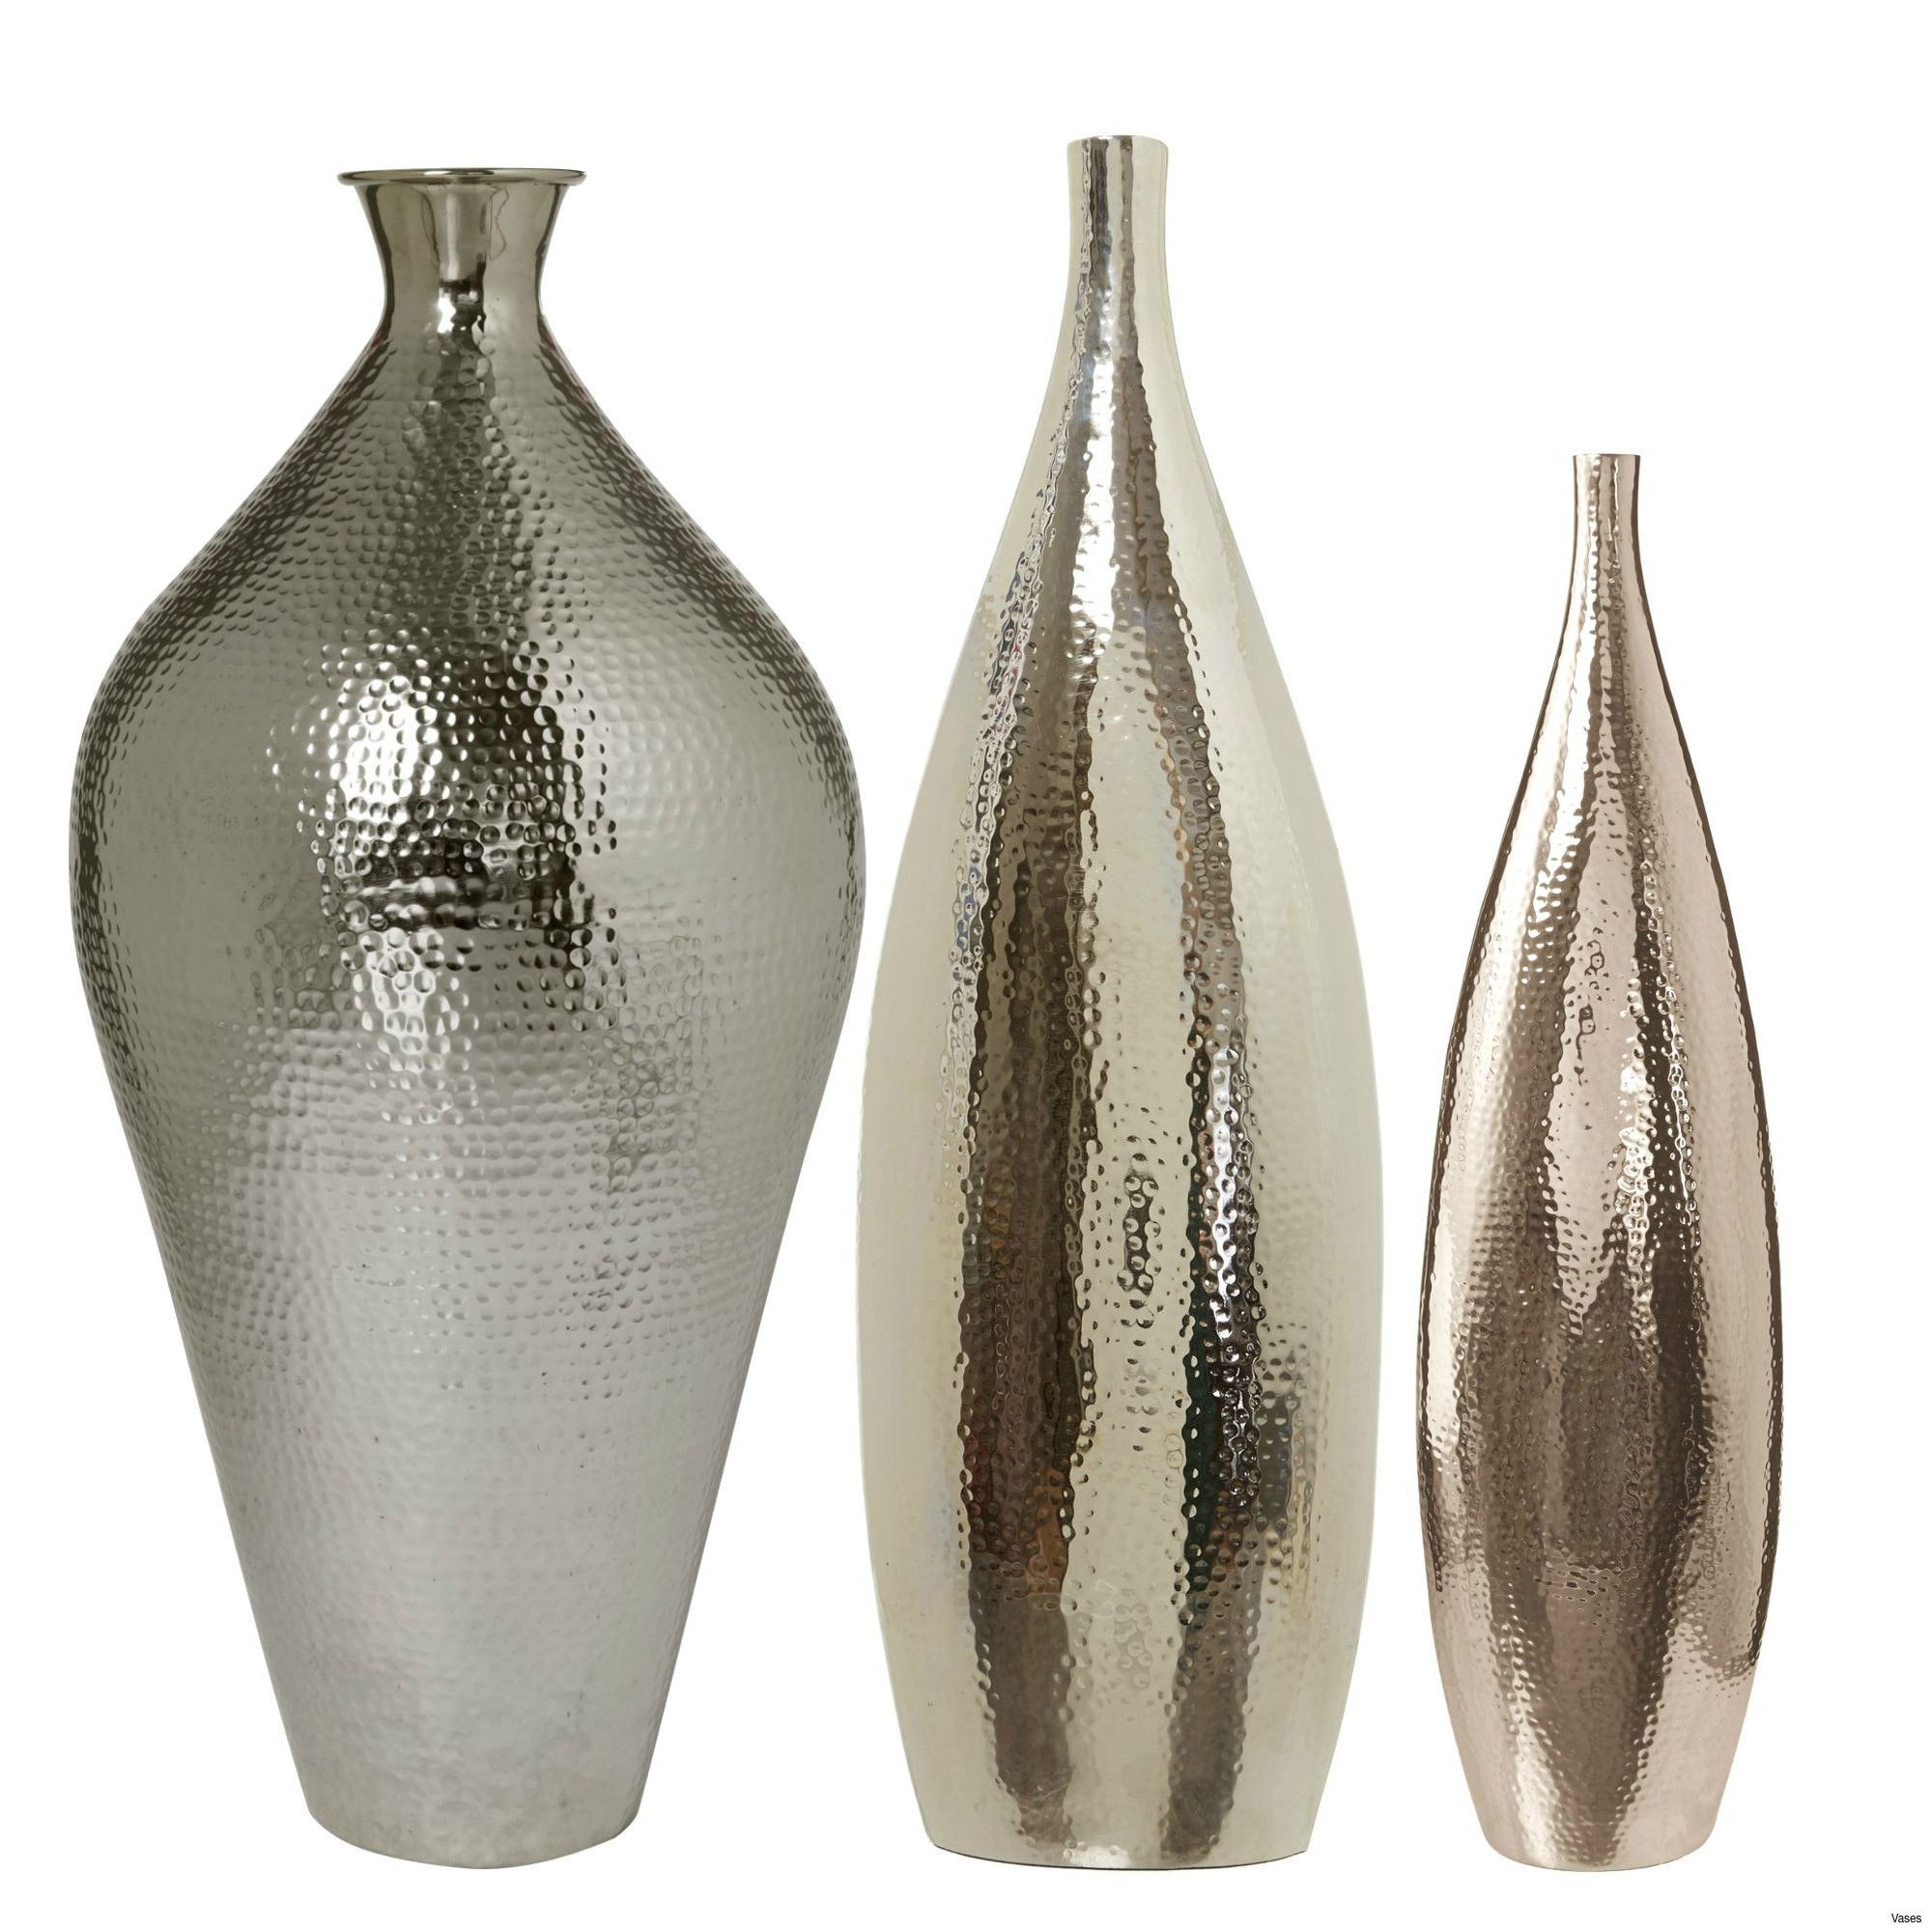 10 Elegant Baccarat Crystal Vase Prices 2024 free download baccarat crystal vase prices of 44 gold and silver vase the weekly world within 44 gold and silver vase